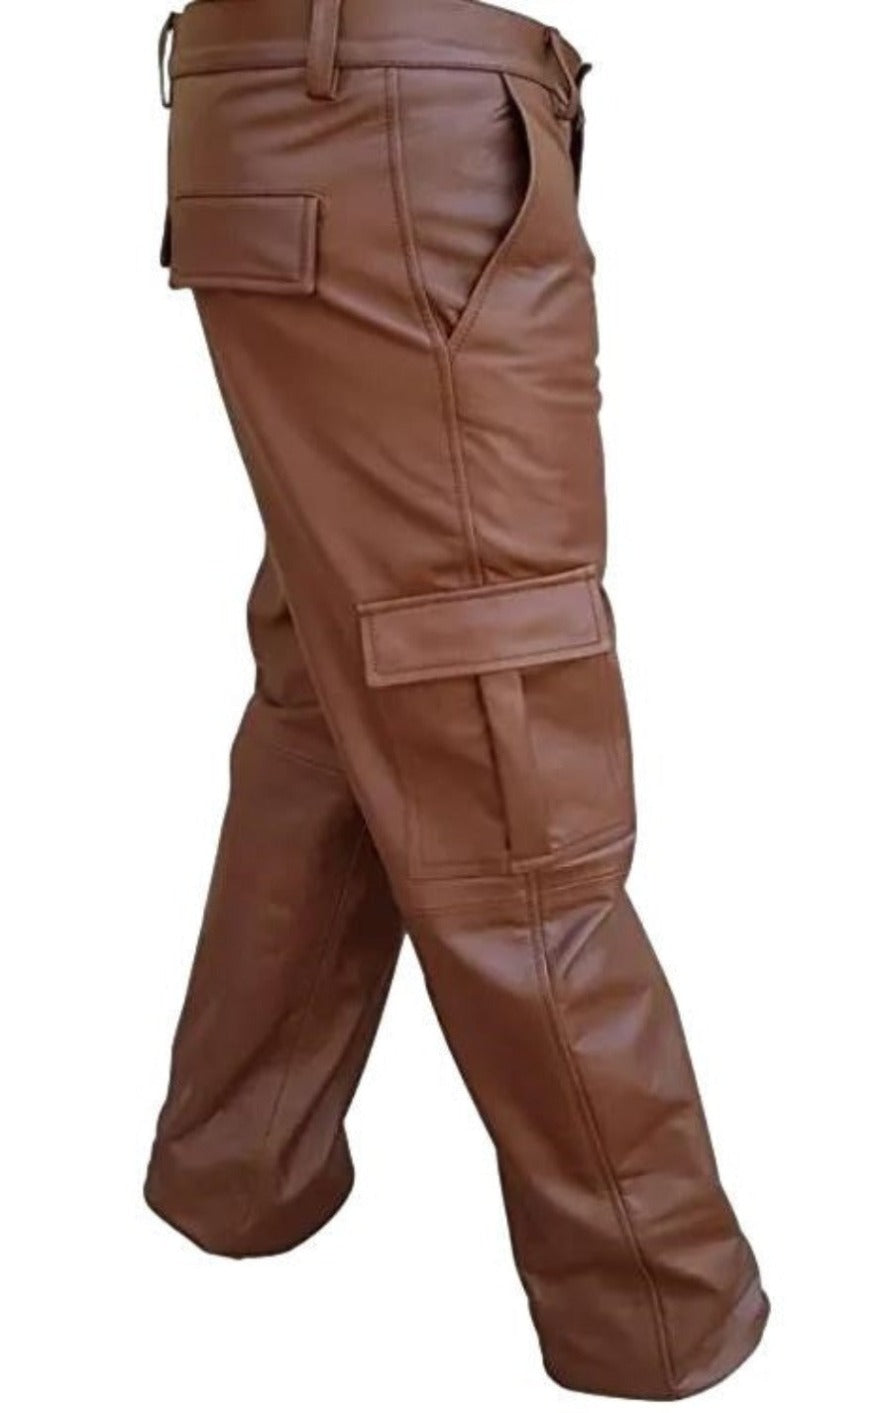 Picture of our Brown Leather Cargo Pants side view.